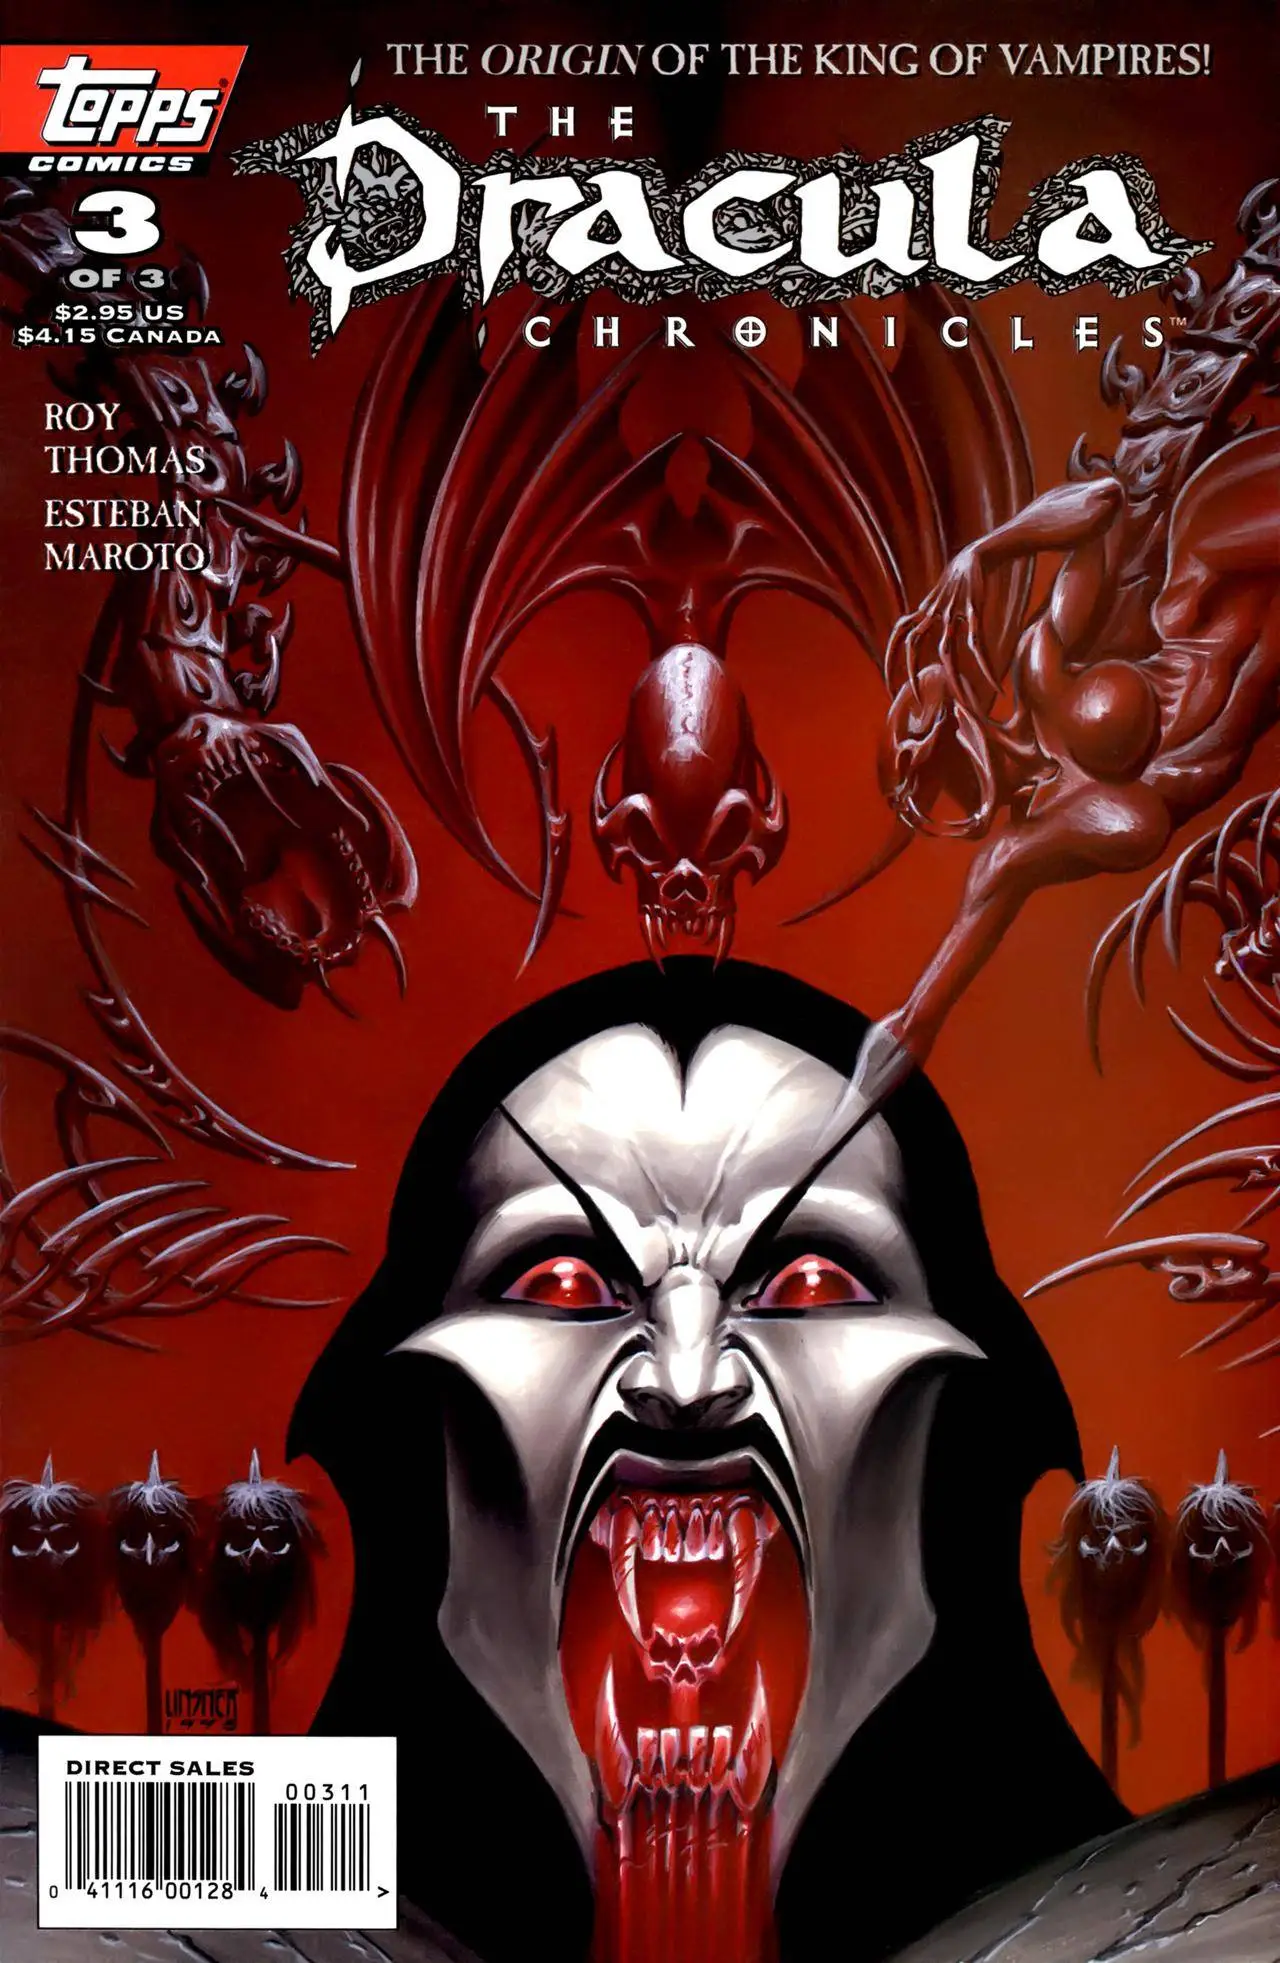 The Dracula Chronicles 03 of 3 1995 2 Covers Minutemen-The Unresurrected